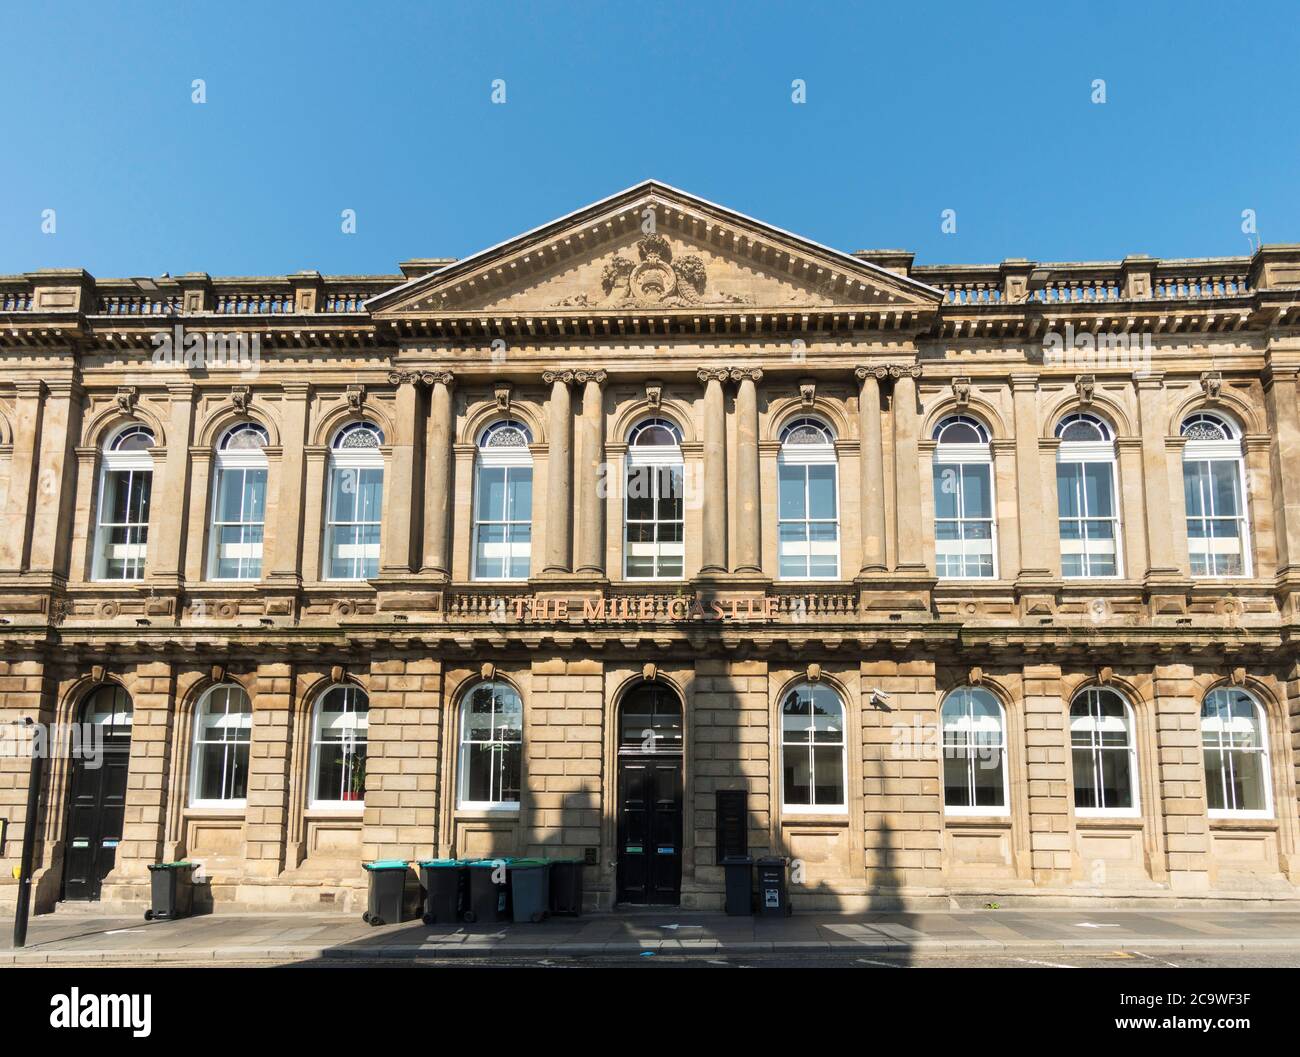 The old Trustee Savings Bank building in Newcastle, now Wetherspoons The Mile Castle pub, England, UK Stock Photo